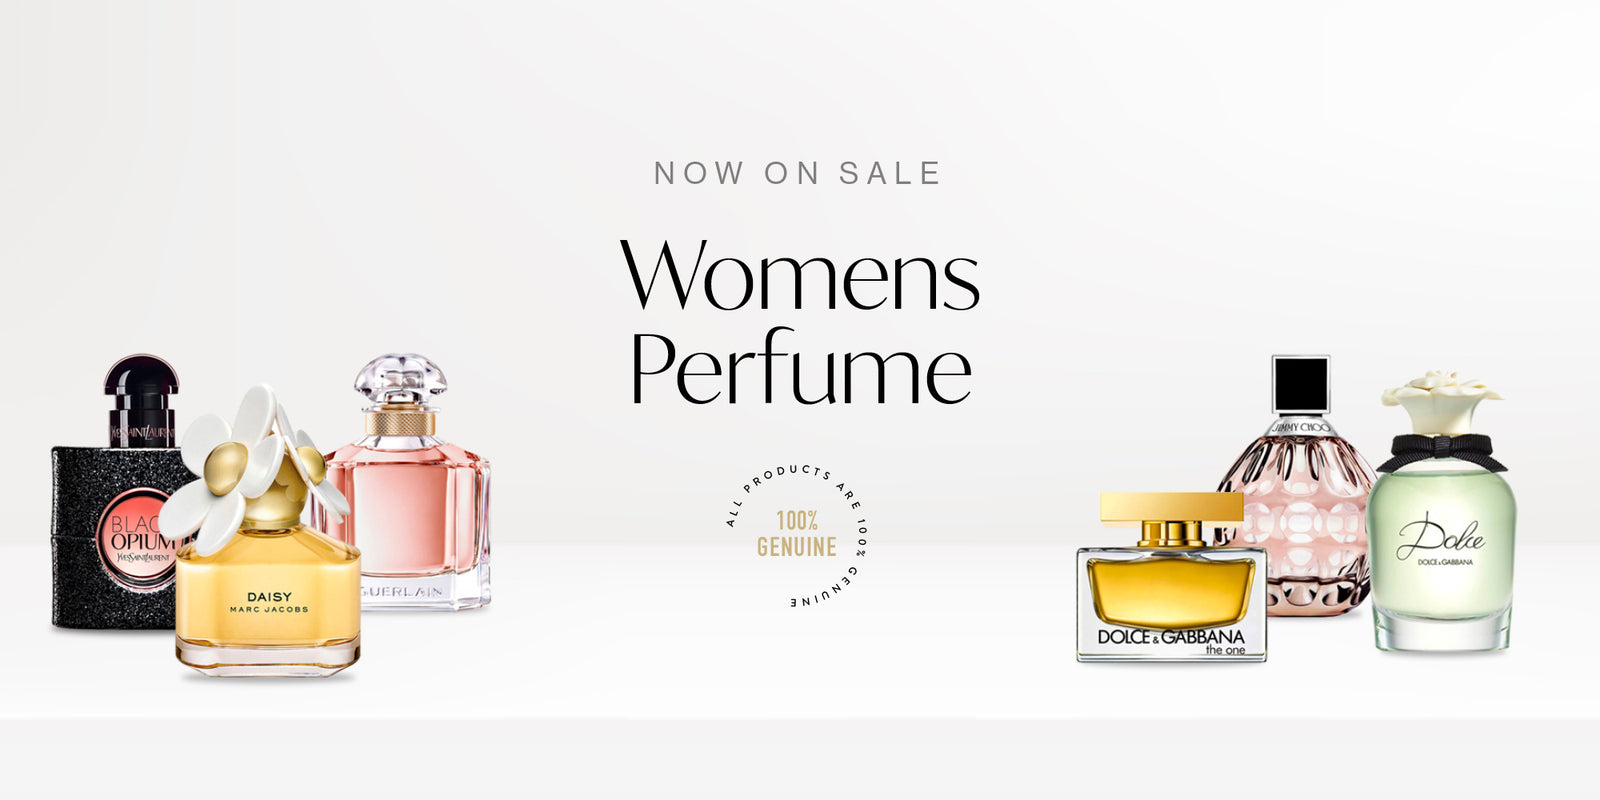 Ted Baker London - Perfume Clearance Centre